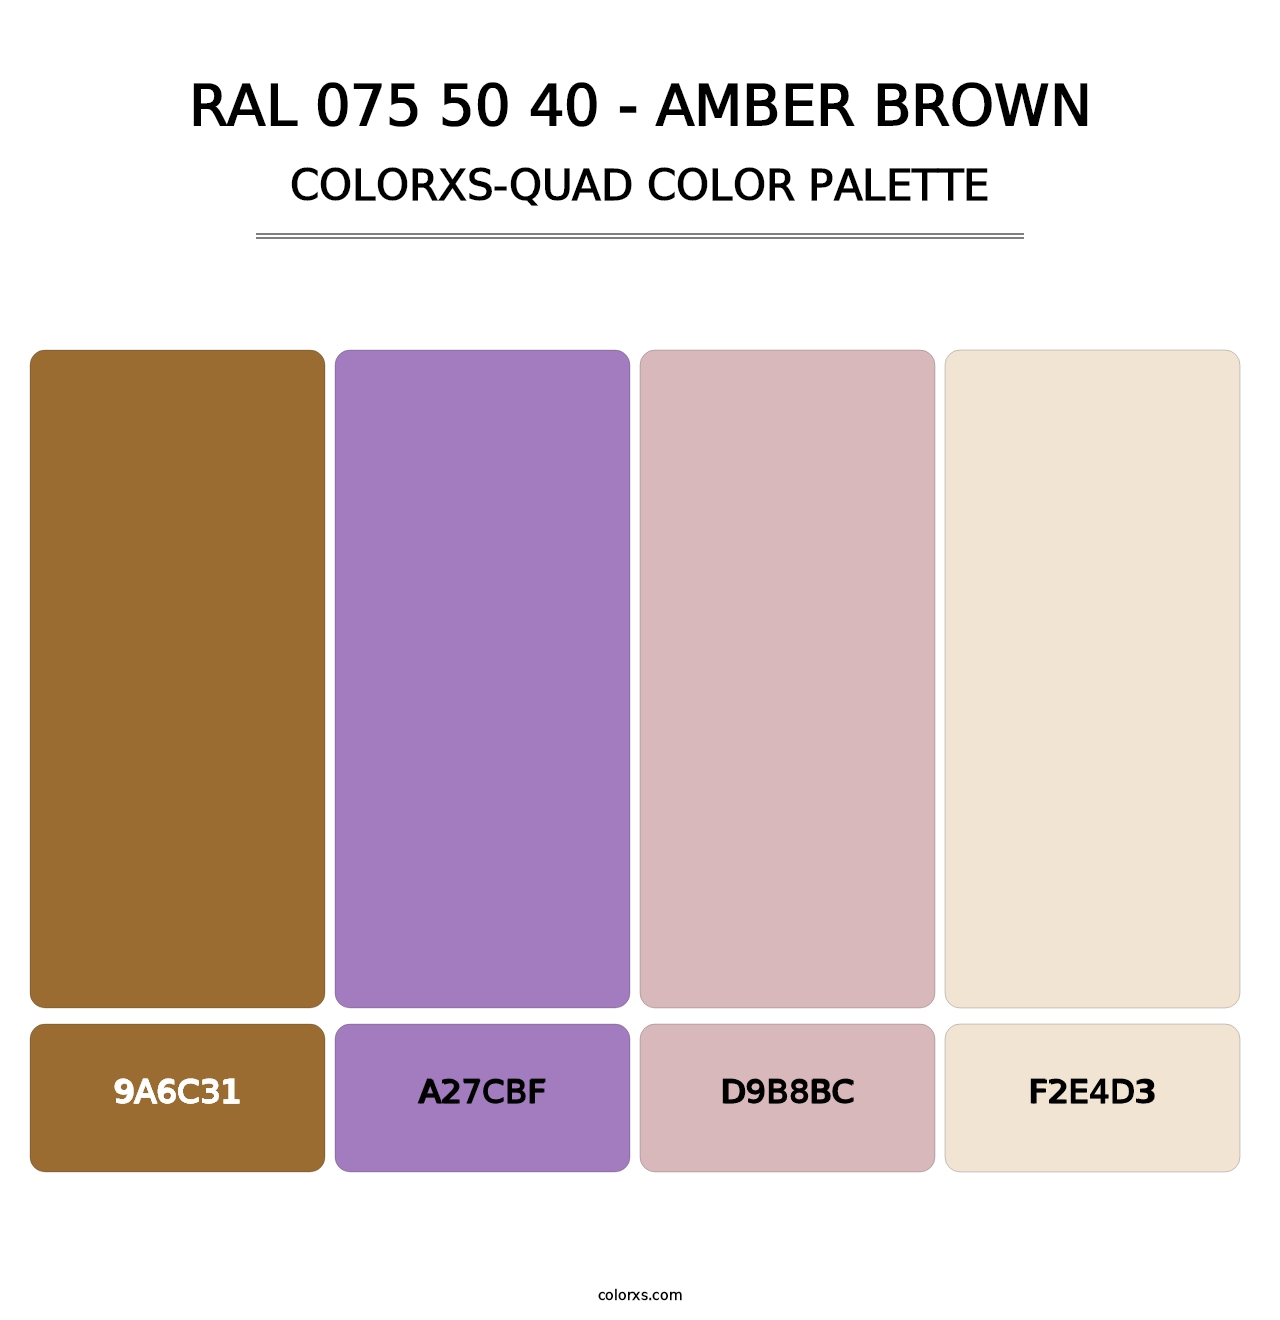 RAL 075 50 40 - Amber Brown - Colorxs Quad Palette